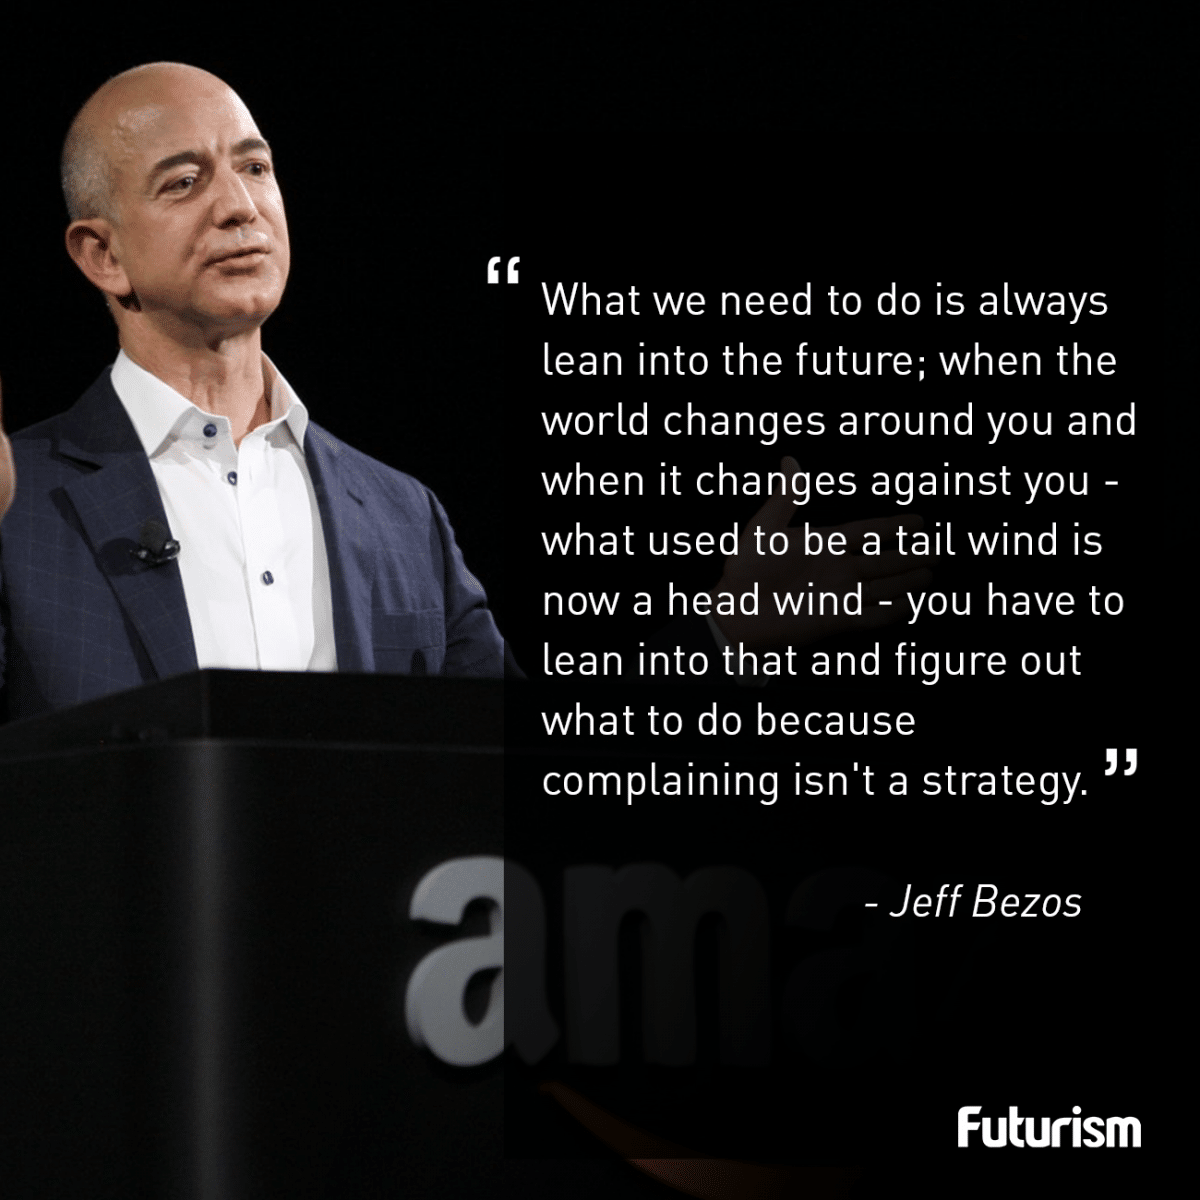 Jeff Bezos quote. Good leadership quotes, Leadership quotes, Fact quotes